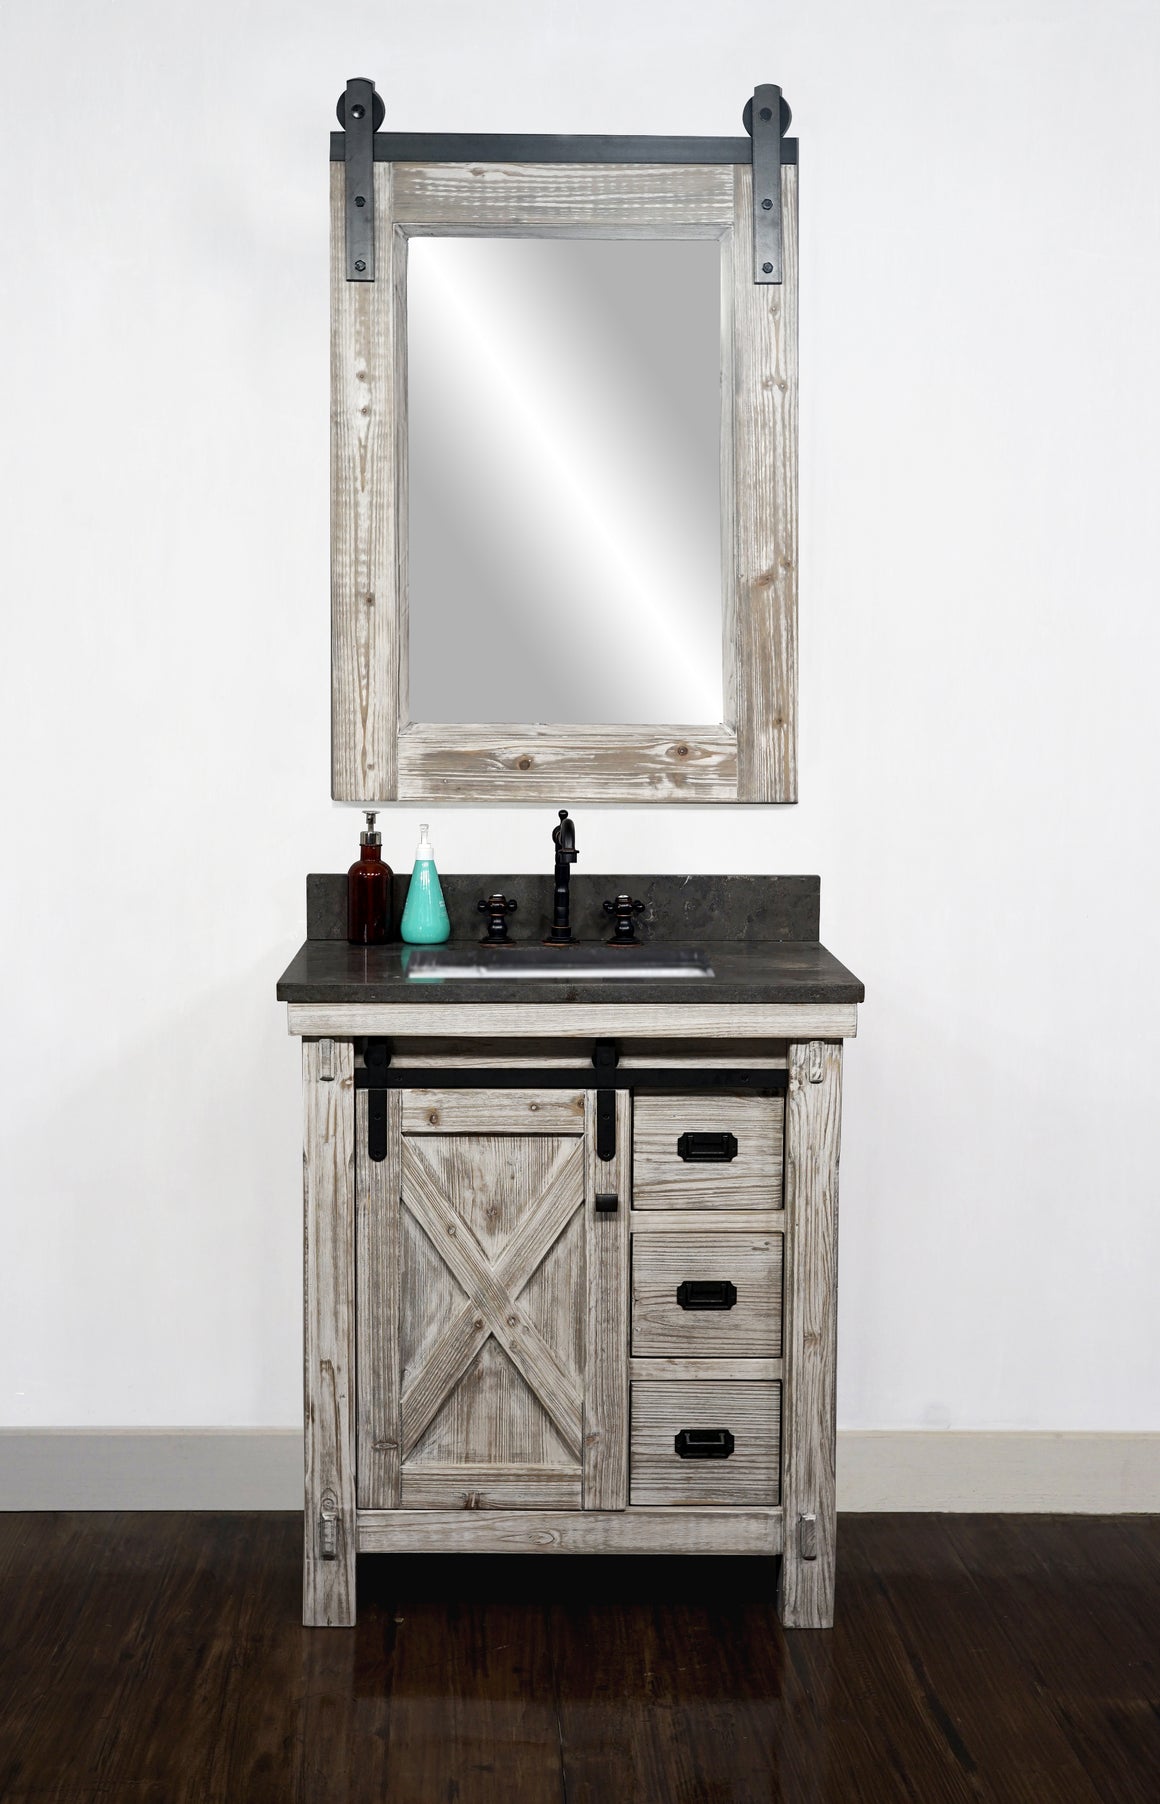 30"RUSTIC SOLID FIR BARN DOOR STYLE SINGLE SINK VANITY IN WHITE WASH WITH LIMESTONE TOP WITH RECTANGULAR SINK-NO FAUCET